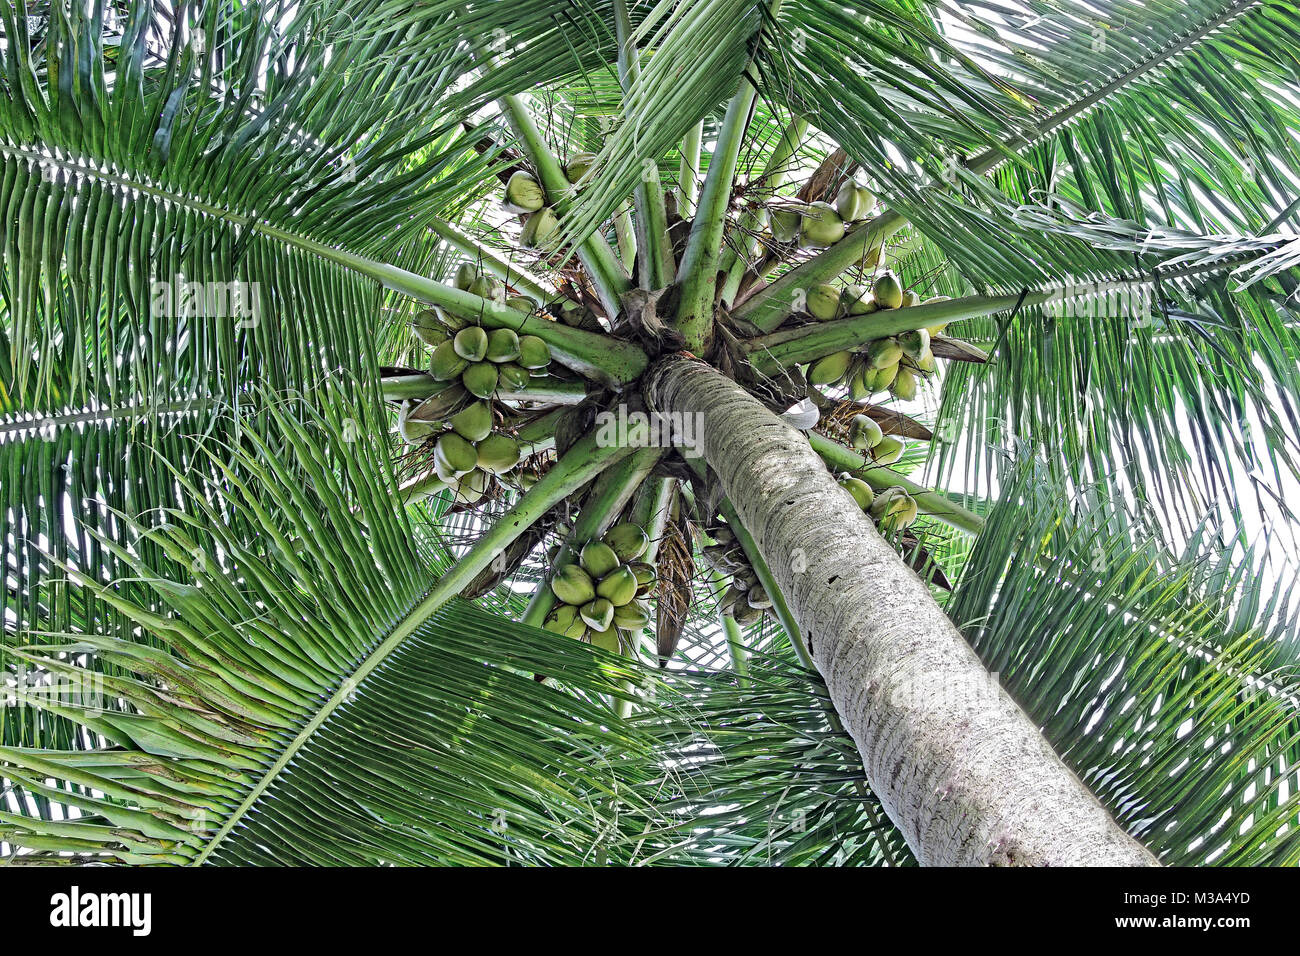 Coconut palm tree canopy with ripe and tender nuts, surrounded by lush green leaves, viewed from ground level Stock Photo